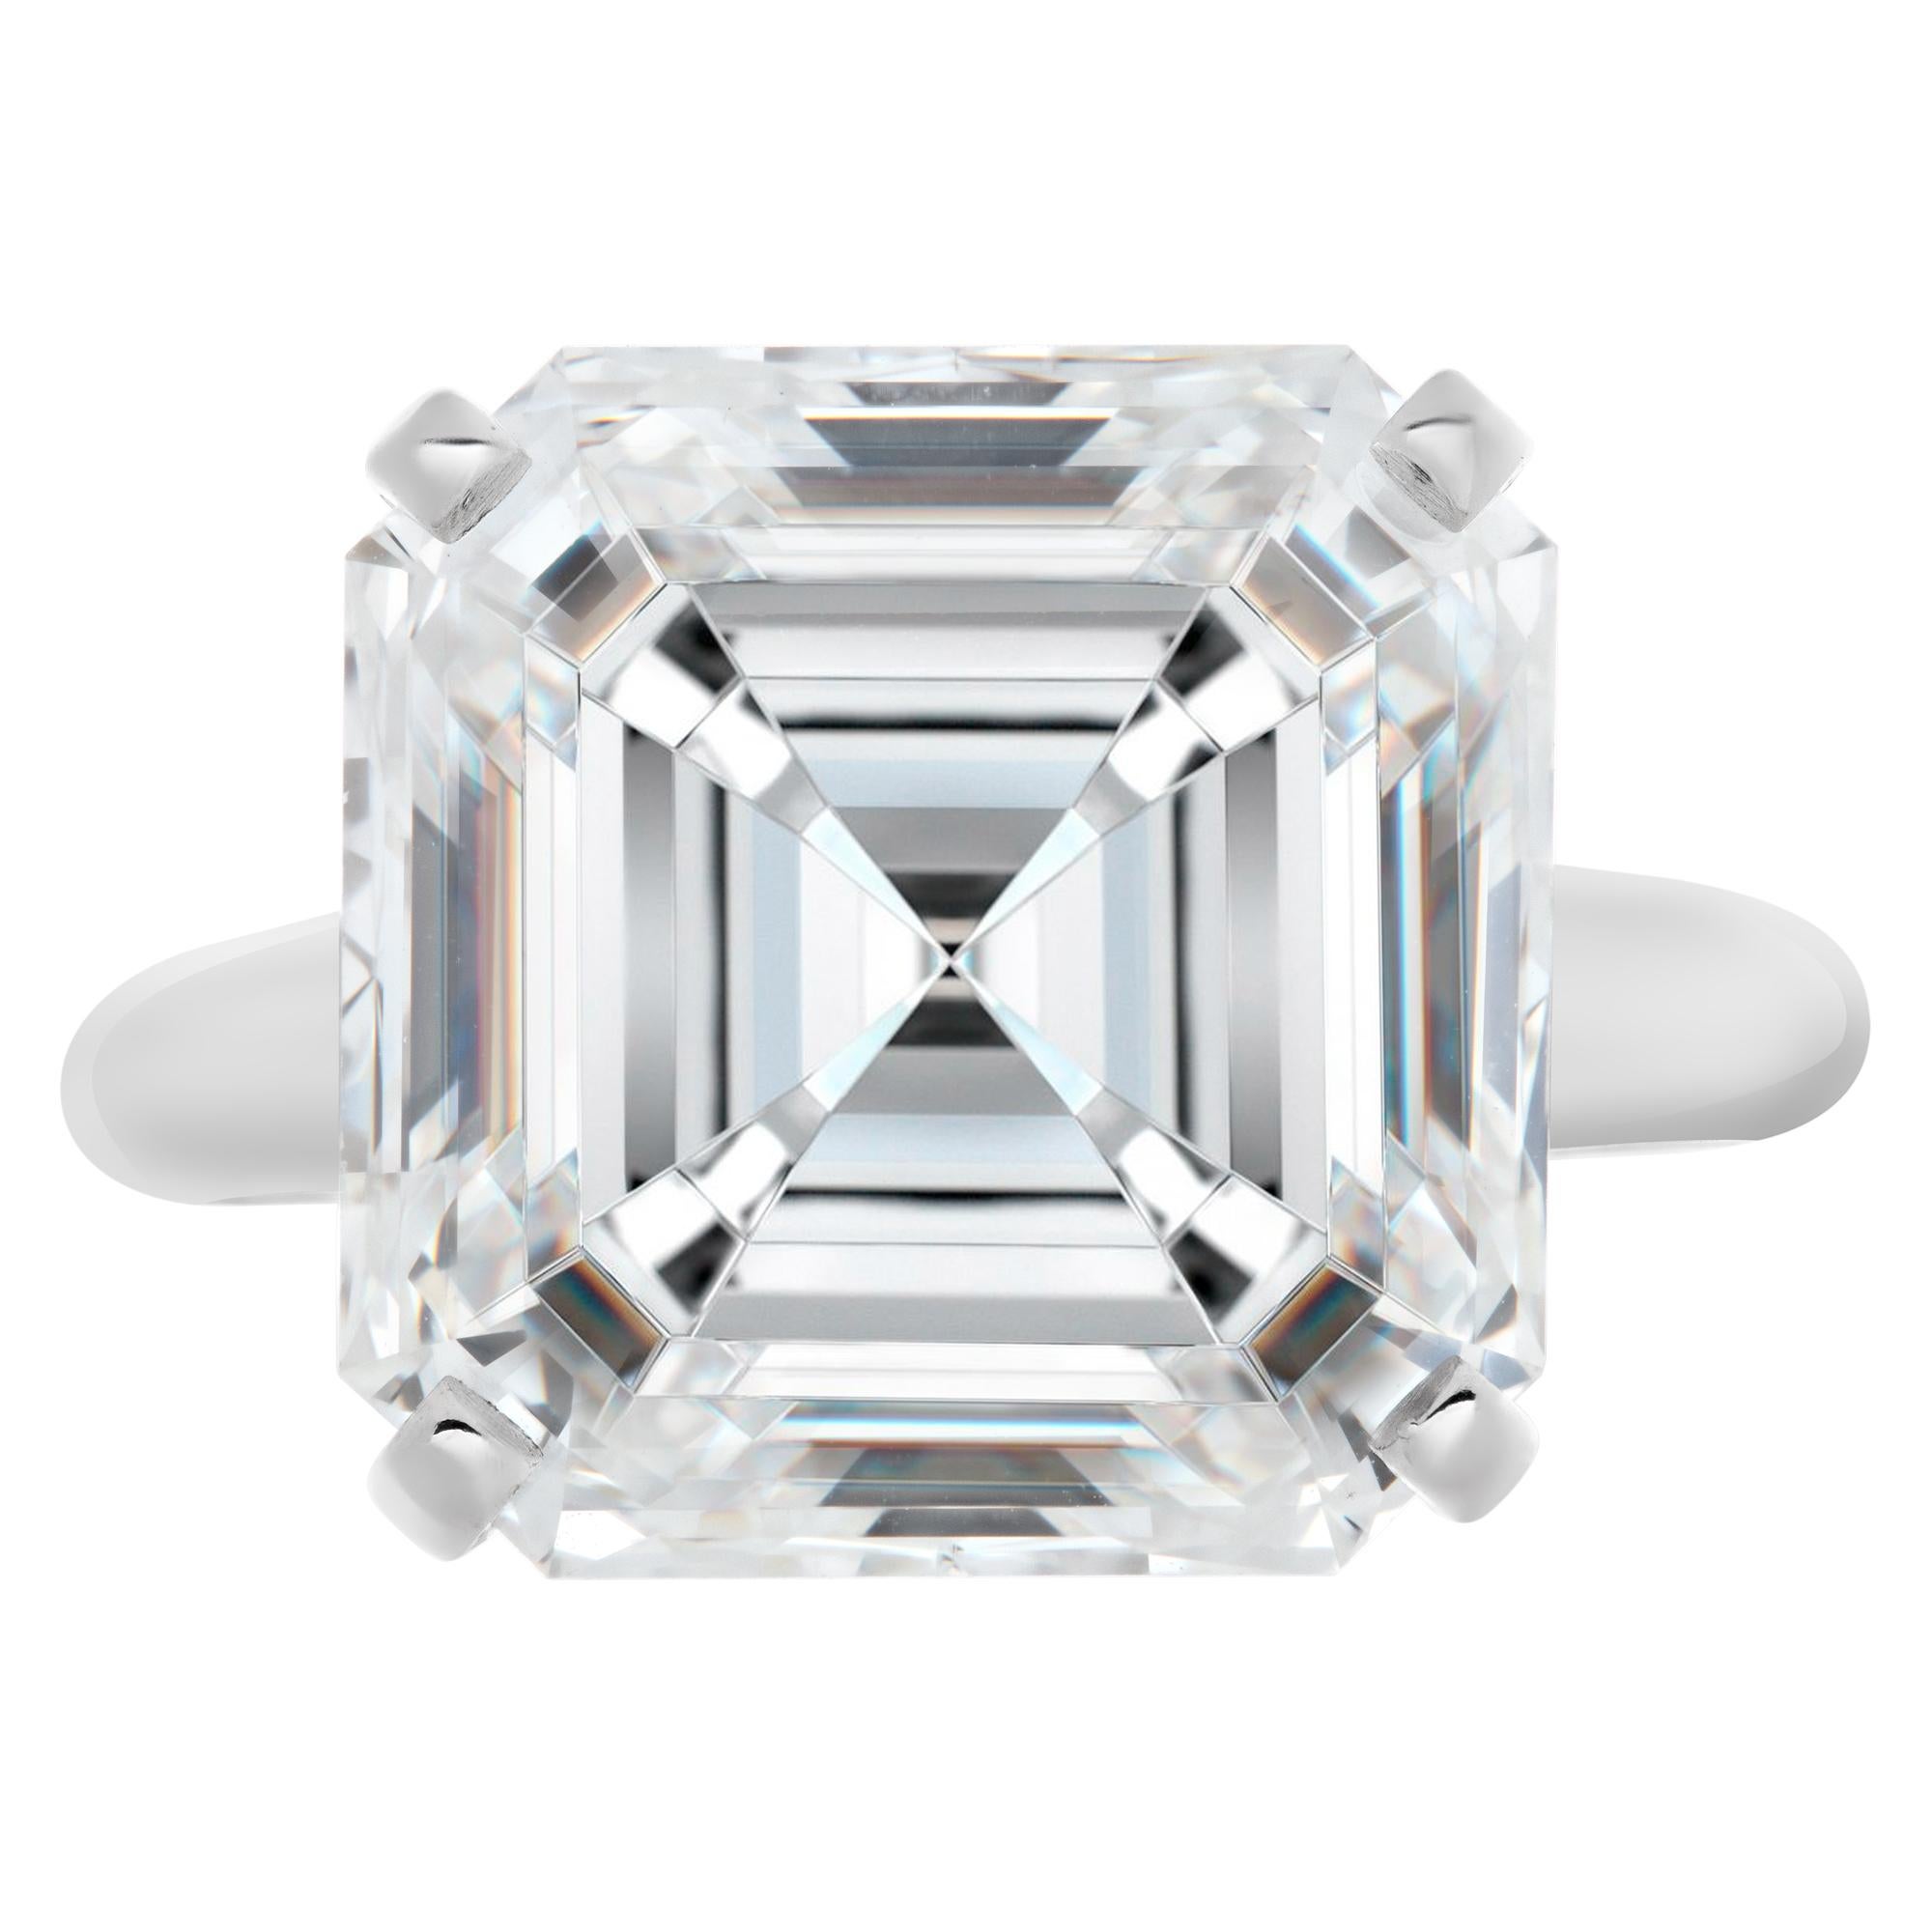 GIA certified asscher cut diamond 9.03 carat (G Color, Vs 1 Clarity) solitaire ring set in 4 prongs platinum setting. Size 3

This GIA certified ring is currently size 3 and some items can be sized up or down, please ask! It weighs 0 gramms and is